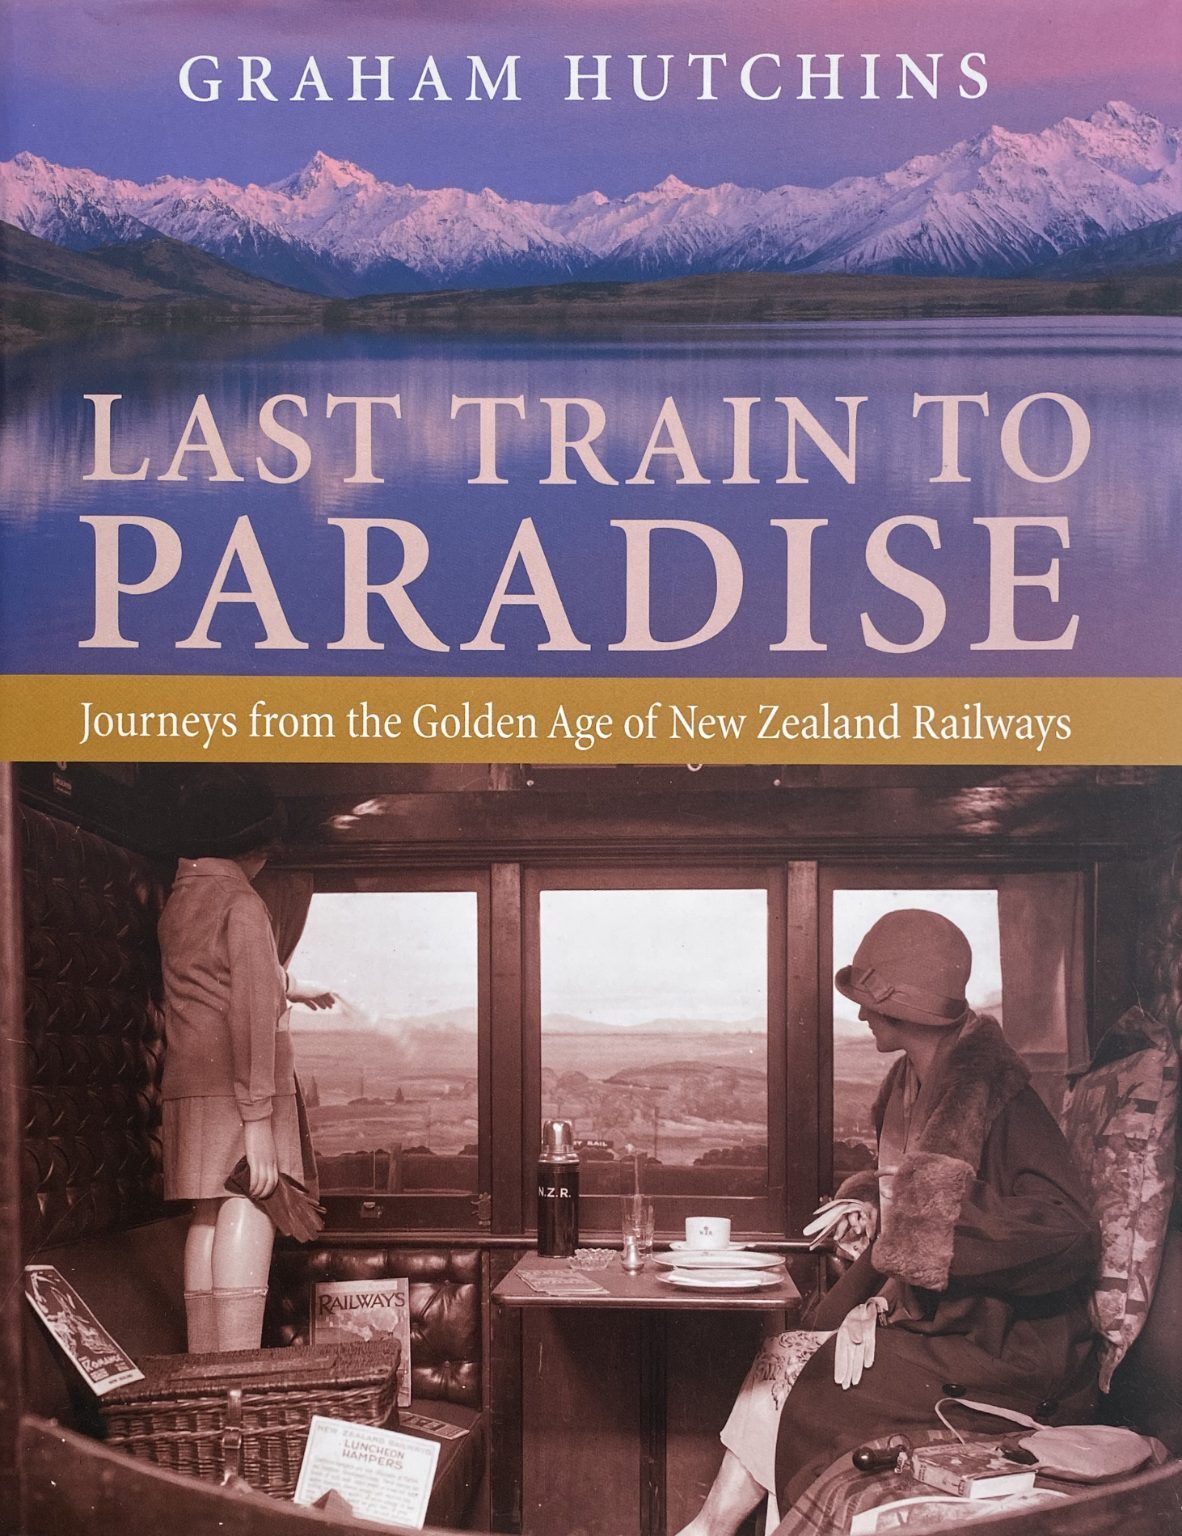 LAST TRAIN TO PARADISE: Journeys From the Golden Age of New Zealand Railways